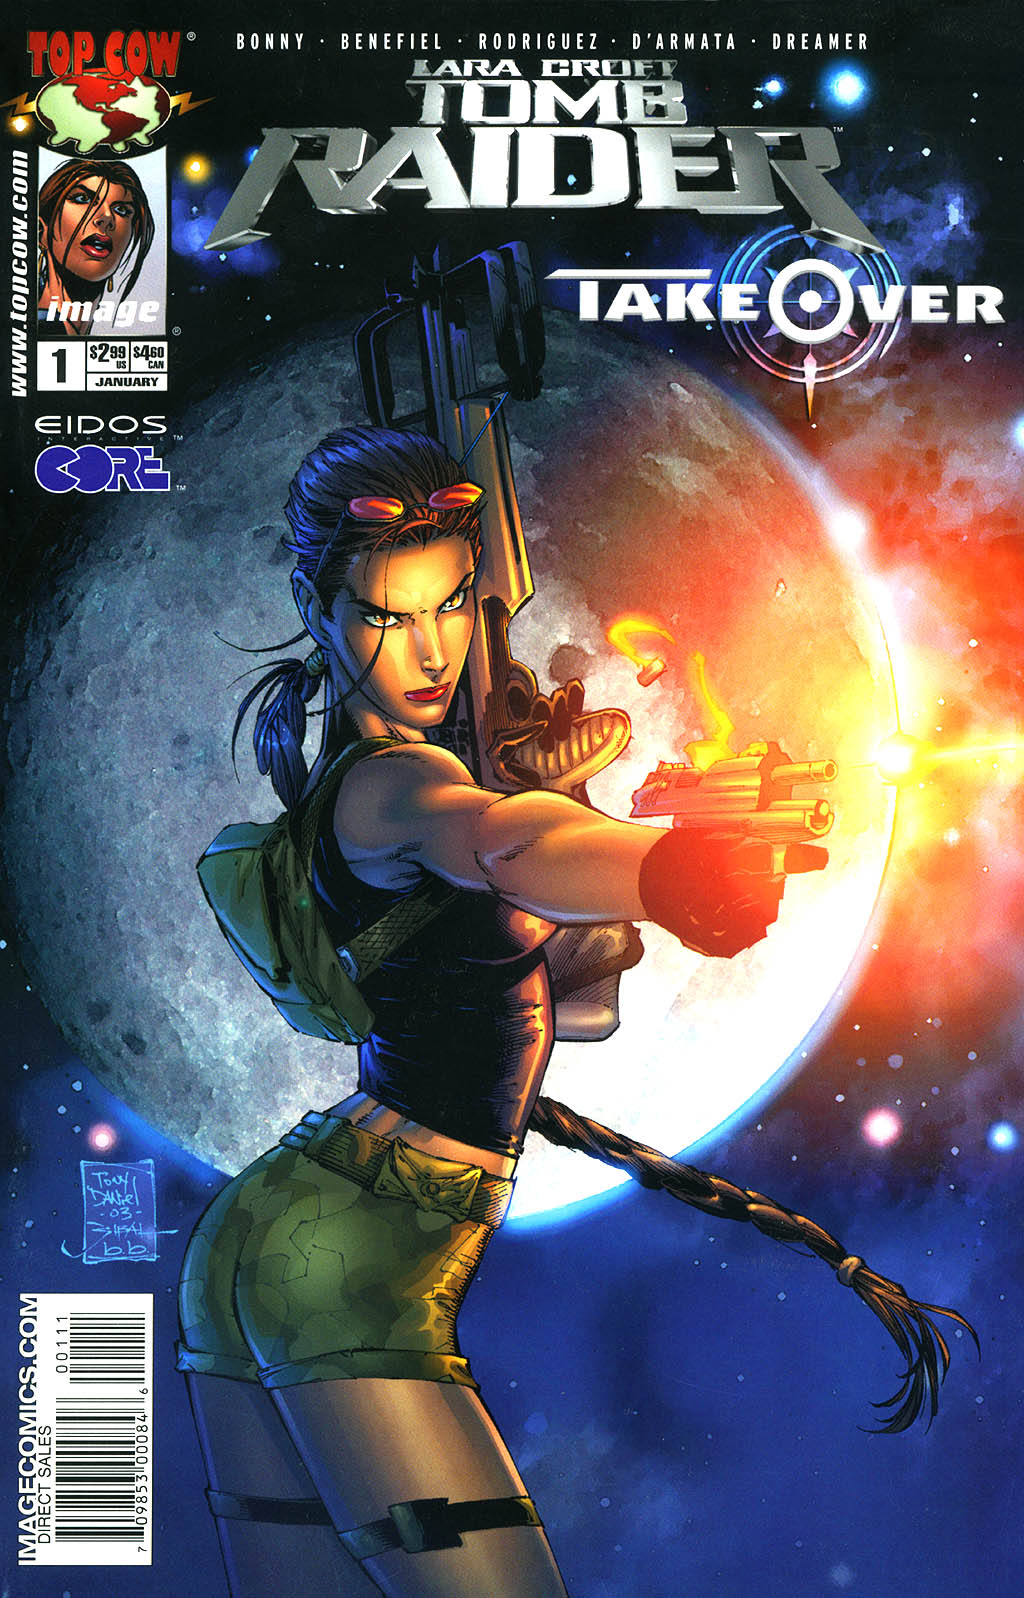 Read online Tomb Raider: Takeover comic -  Issue # Full - 1